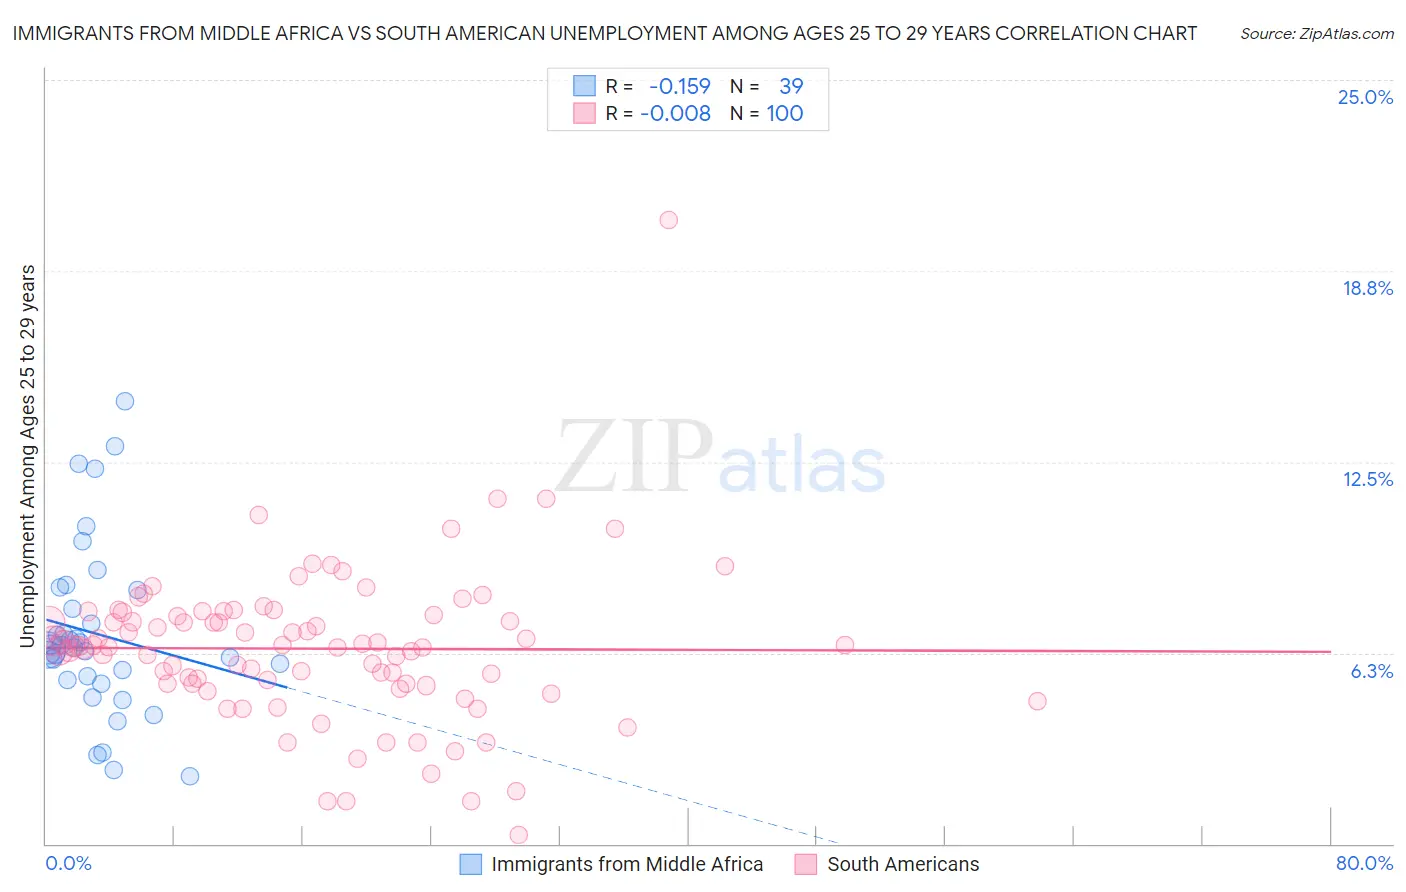 Immigrants from Middle Africa vs South American Unemployment Among Ages 25 to 29 years